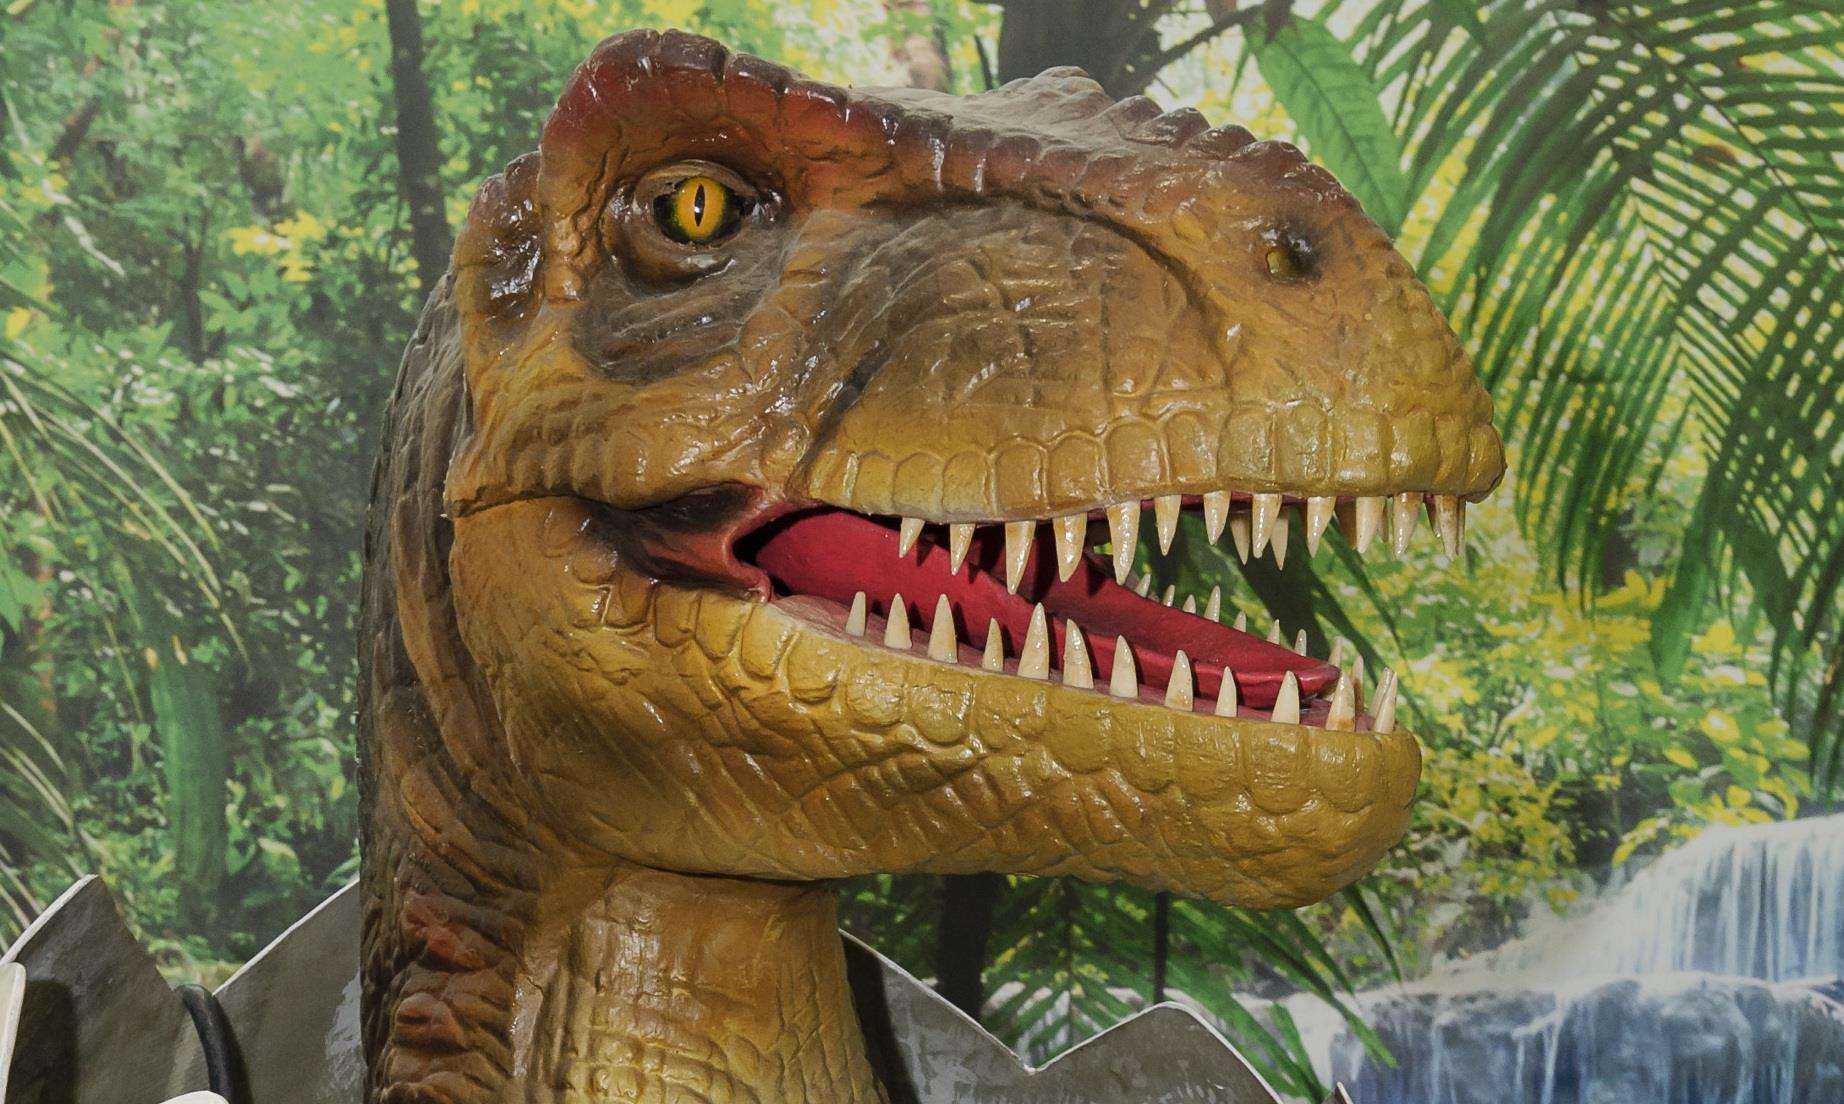 Scientist at University of Kent believe they have mapped the genome structure of dinosaurs like Tyrannosaurus Rex